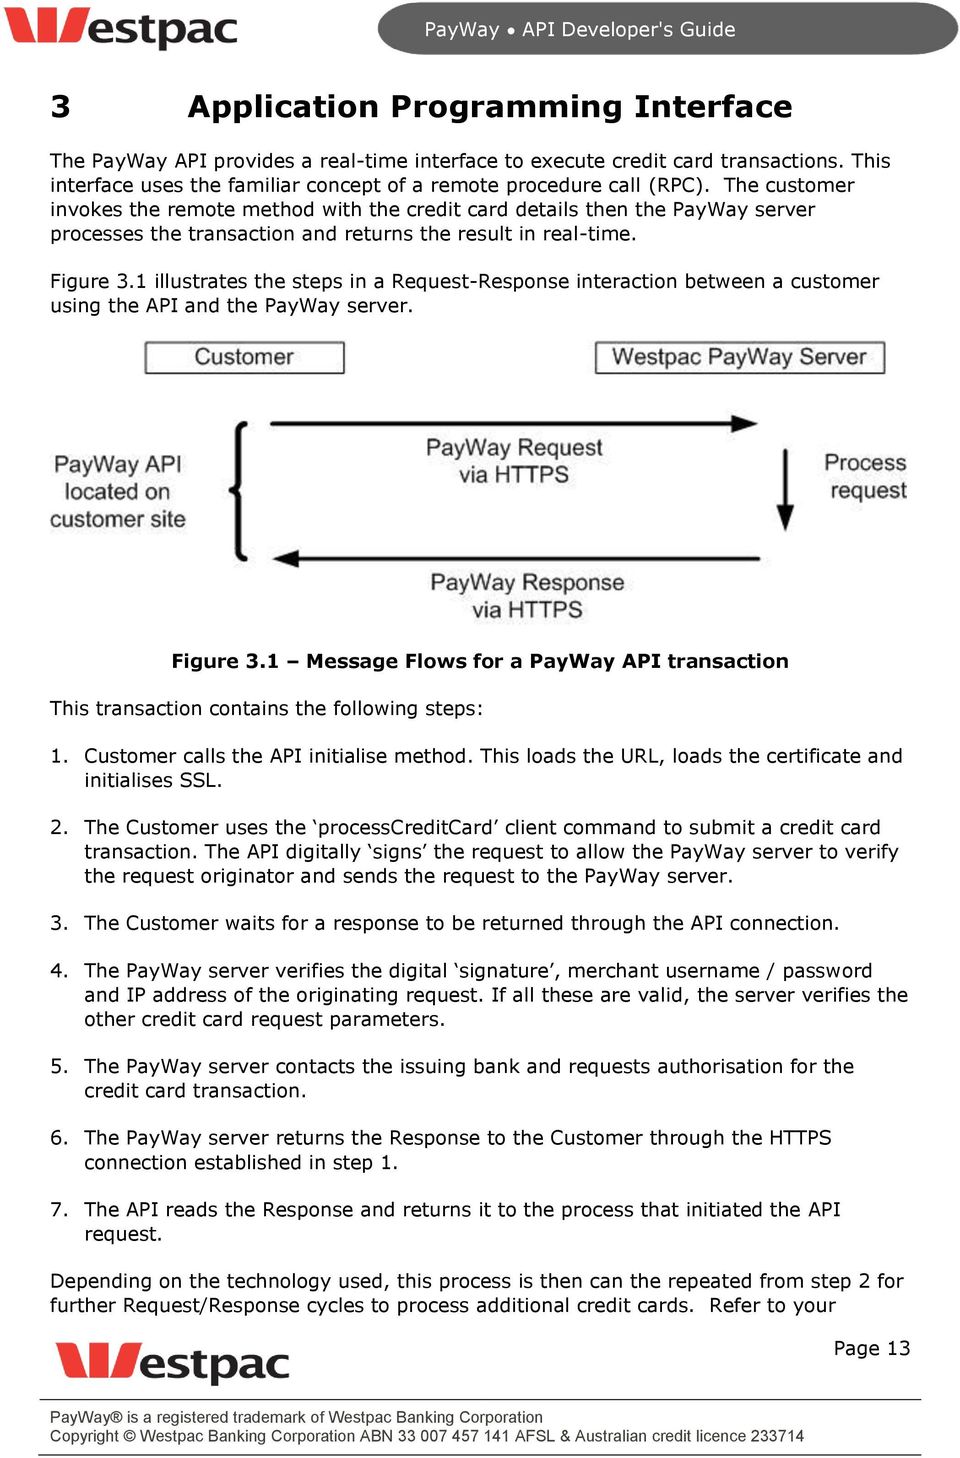 The customer invokes the remote method with the credit card details then the PayWay server processes the transaction and returns the result in real-time. Figure 3.